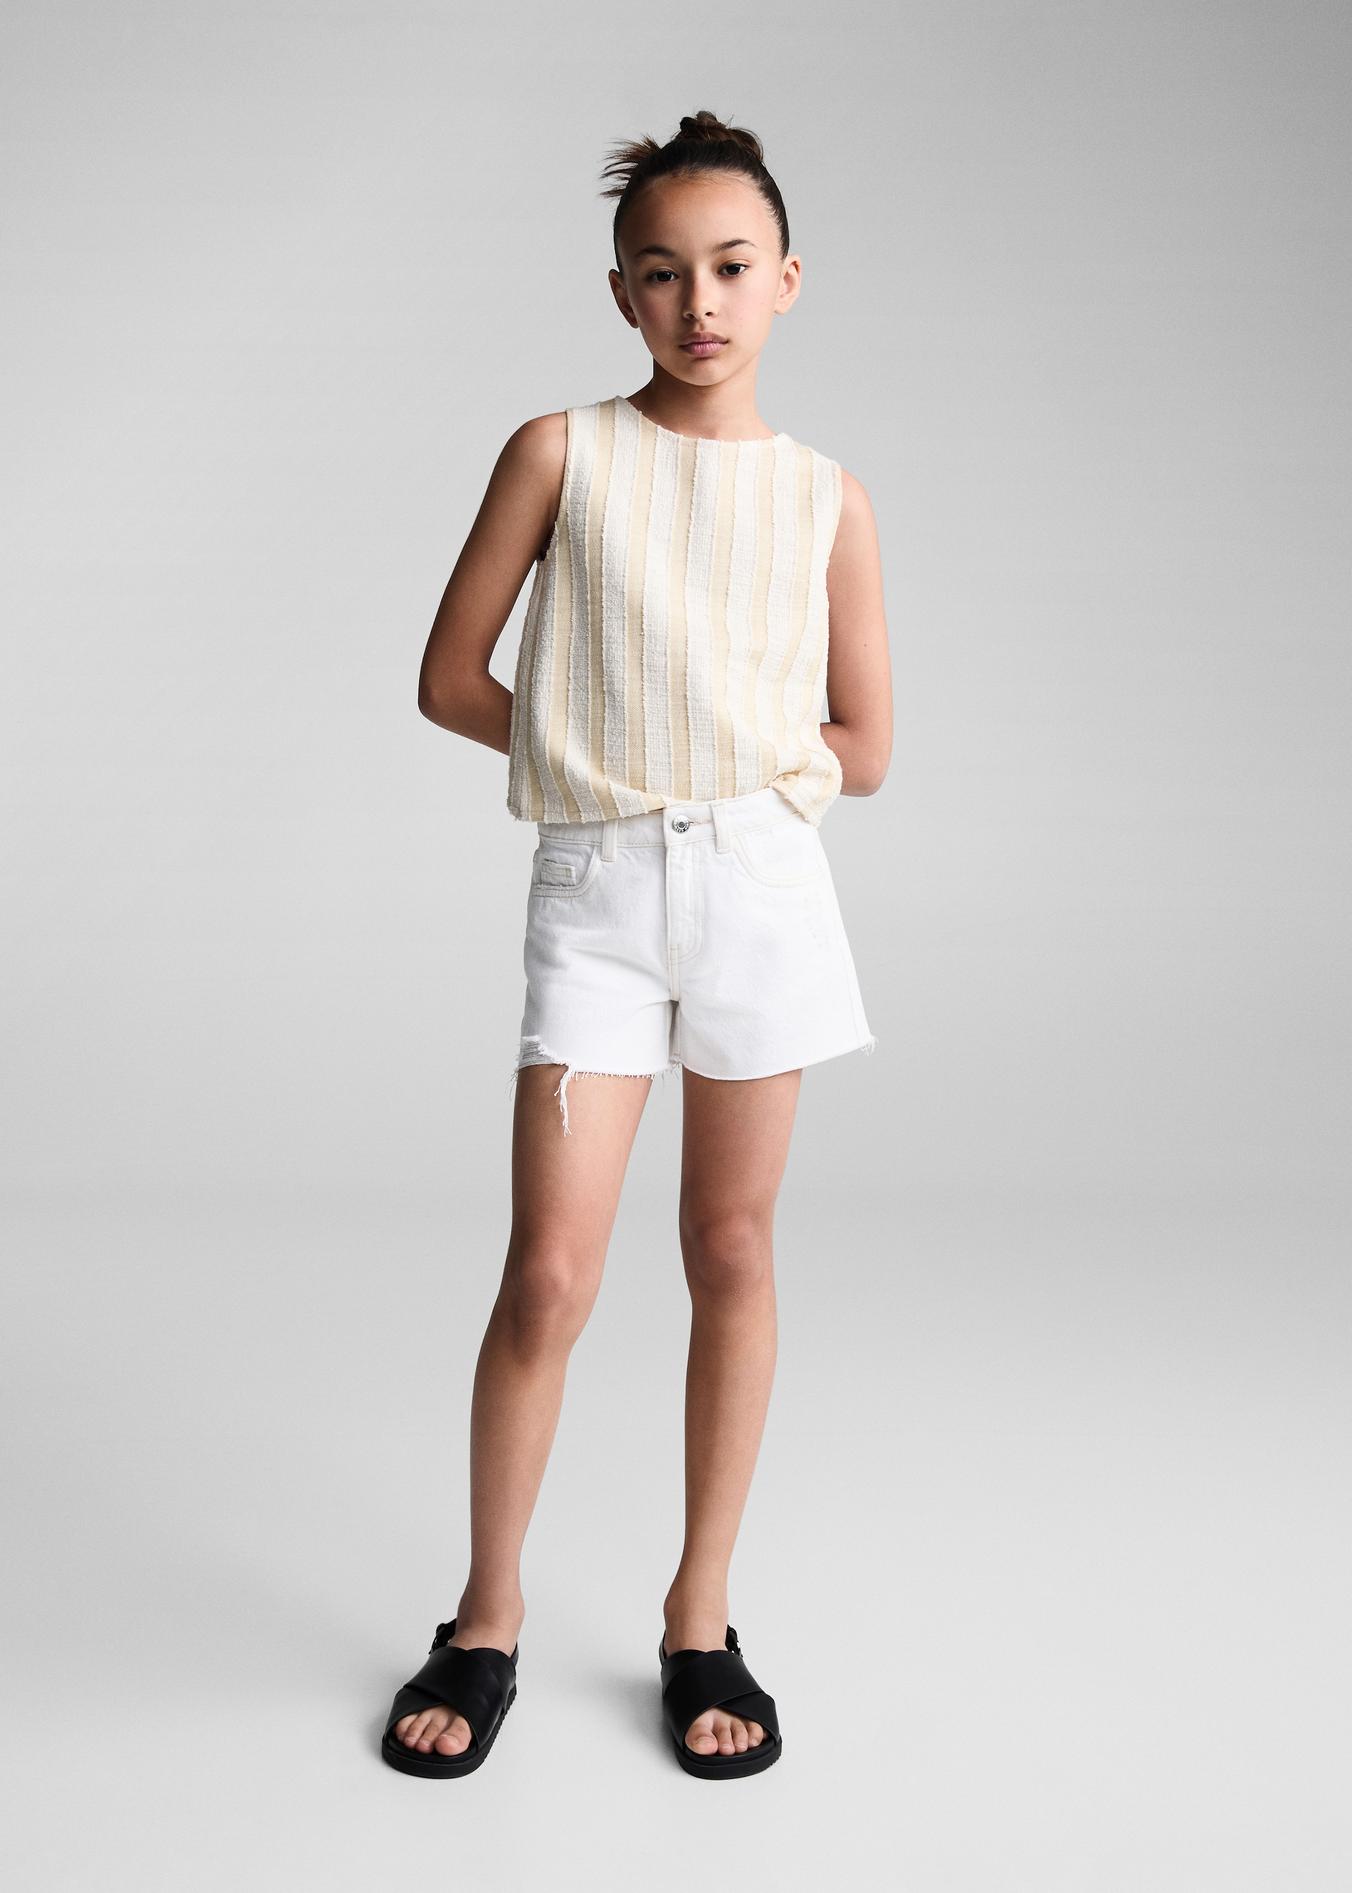 Decorative ripped denim shorts offers at S$ 19.9 in Mango Kids